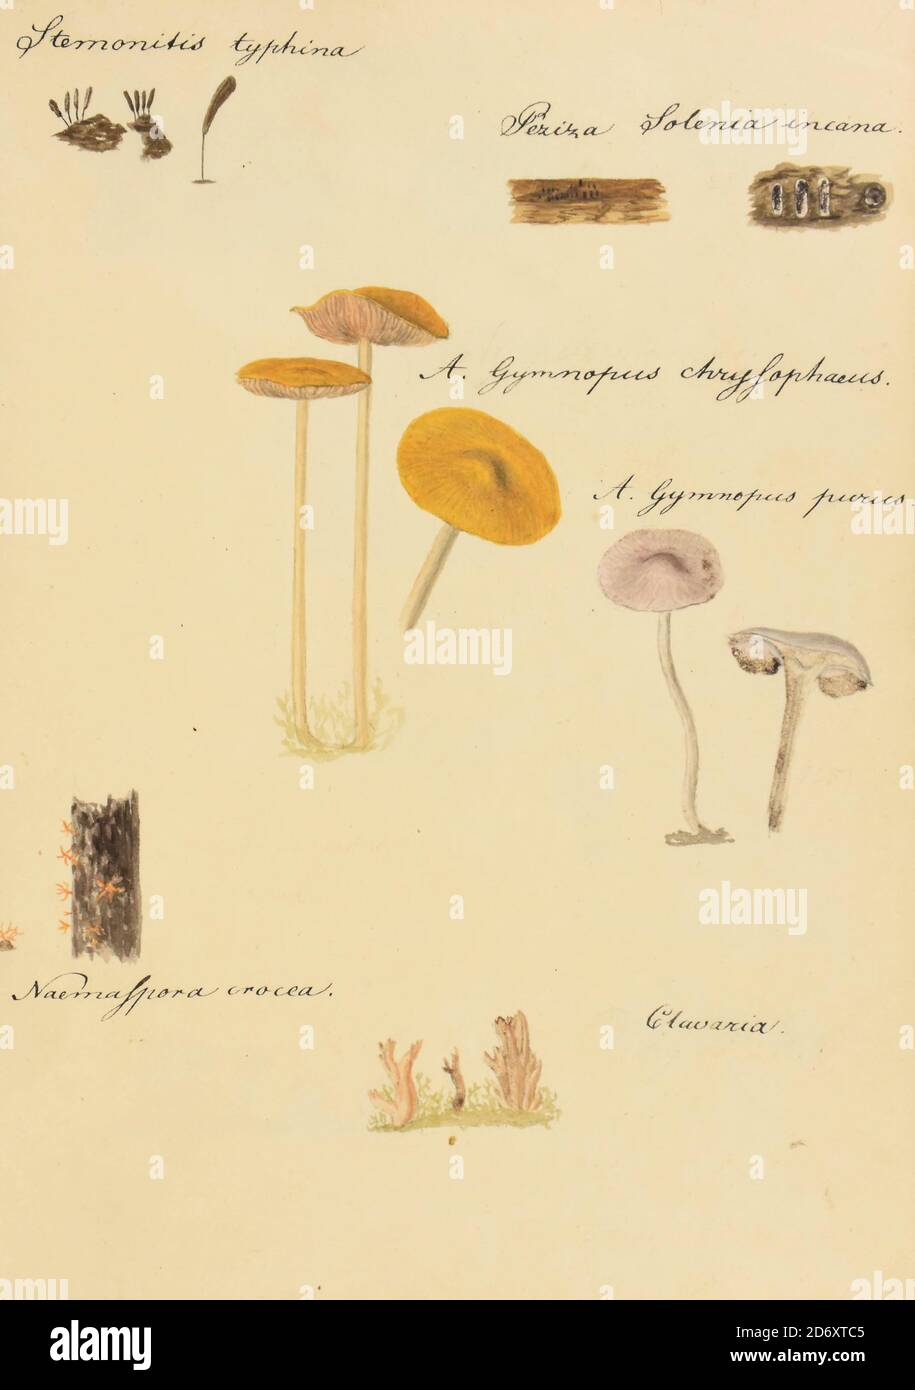 Hand Painted illustration of North American Fungi from the book 'Icones fungorum Niskiensium' by Schweinitz, Lewis David von, 1780-1834 Publication date 1805. Lewis David de Schweinitz (13 February 1780 – 8 February 1834) was a German-American botanist and mycologist. He is considered by some the 'Father of North American Mycology', but also made significant contributions to botany. Stock Photo